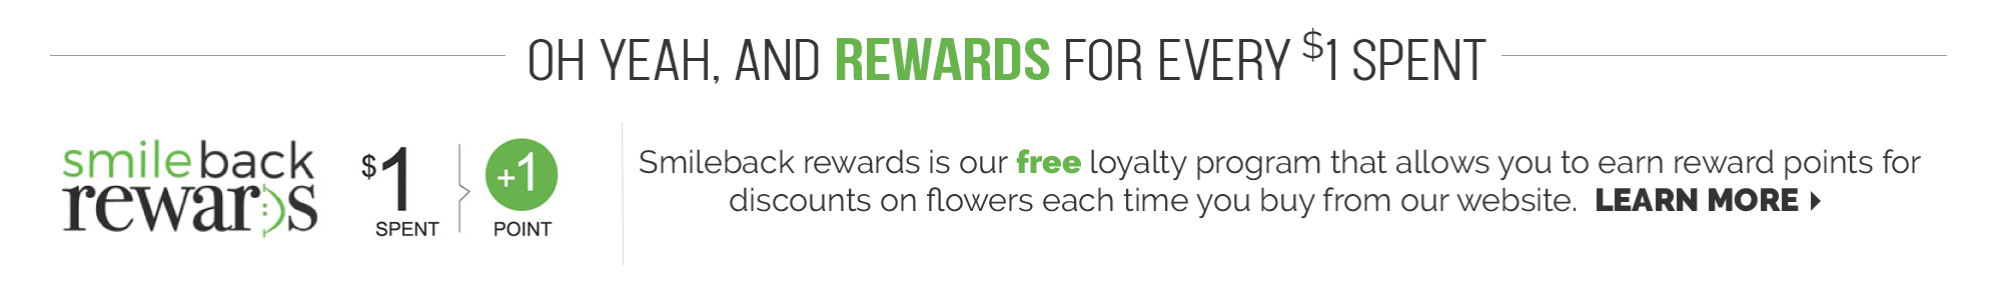 All A Bloom Smileback Rewards Program, Earn 1 point for every $1 spent